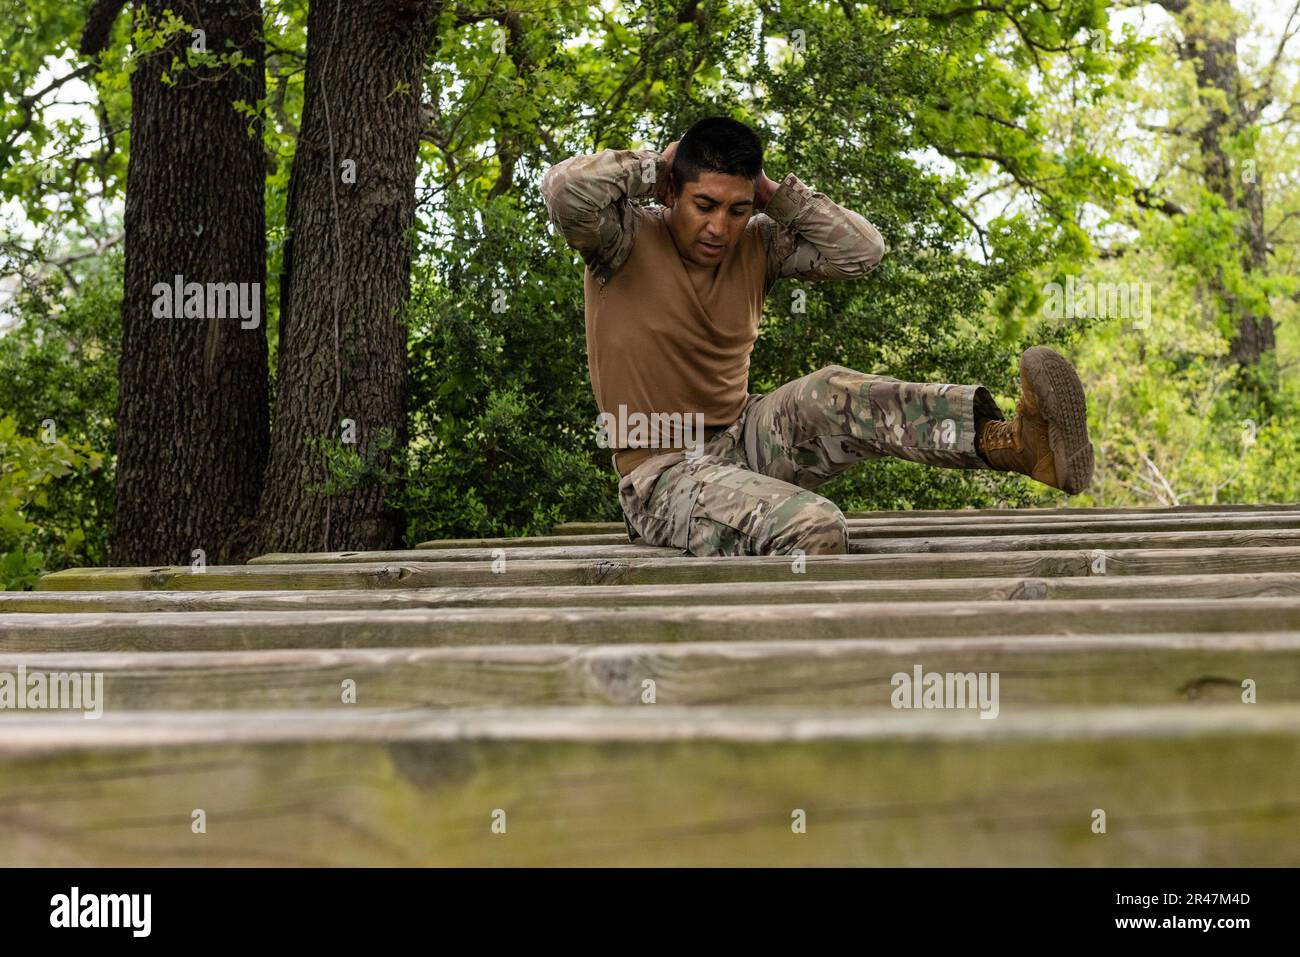 Chilean Marine Cpl. Juan Barria navigates High Step Over during the obstacle course portion of the Texas Military Department’s Best Warrior Competition at Fort Hood on Mar. 30, 2023. The TMD invites service members from its partner nations to participate in the friendly, six-day challenge. The partnership is part of the National Guard Bureau’s State Partnership Program, which pairs National Guards from every state and U.S. territories with partner nations to increase regional security and advance U.S. interests. The program has been successfully building relations for 30 years and now includes Stock Photo